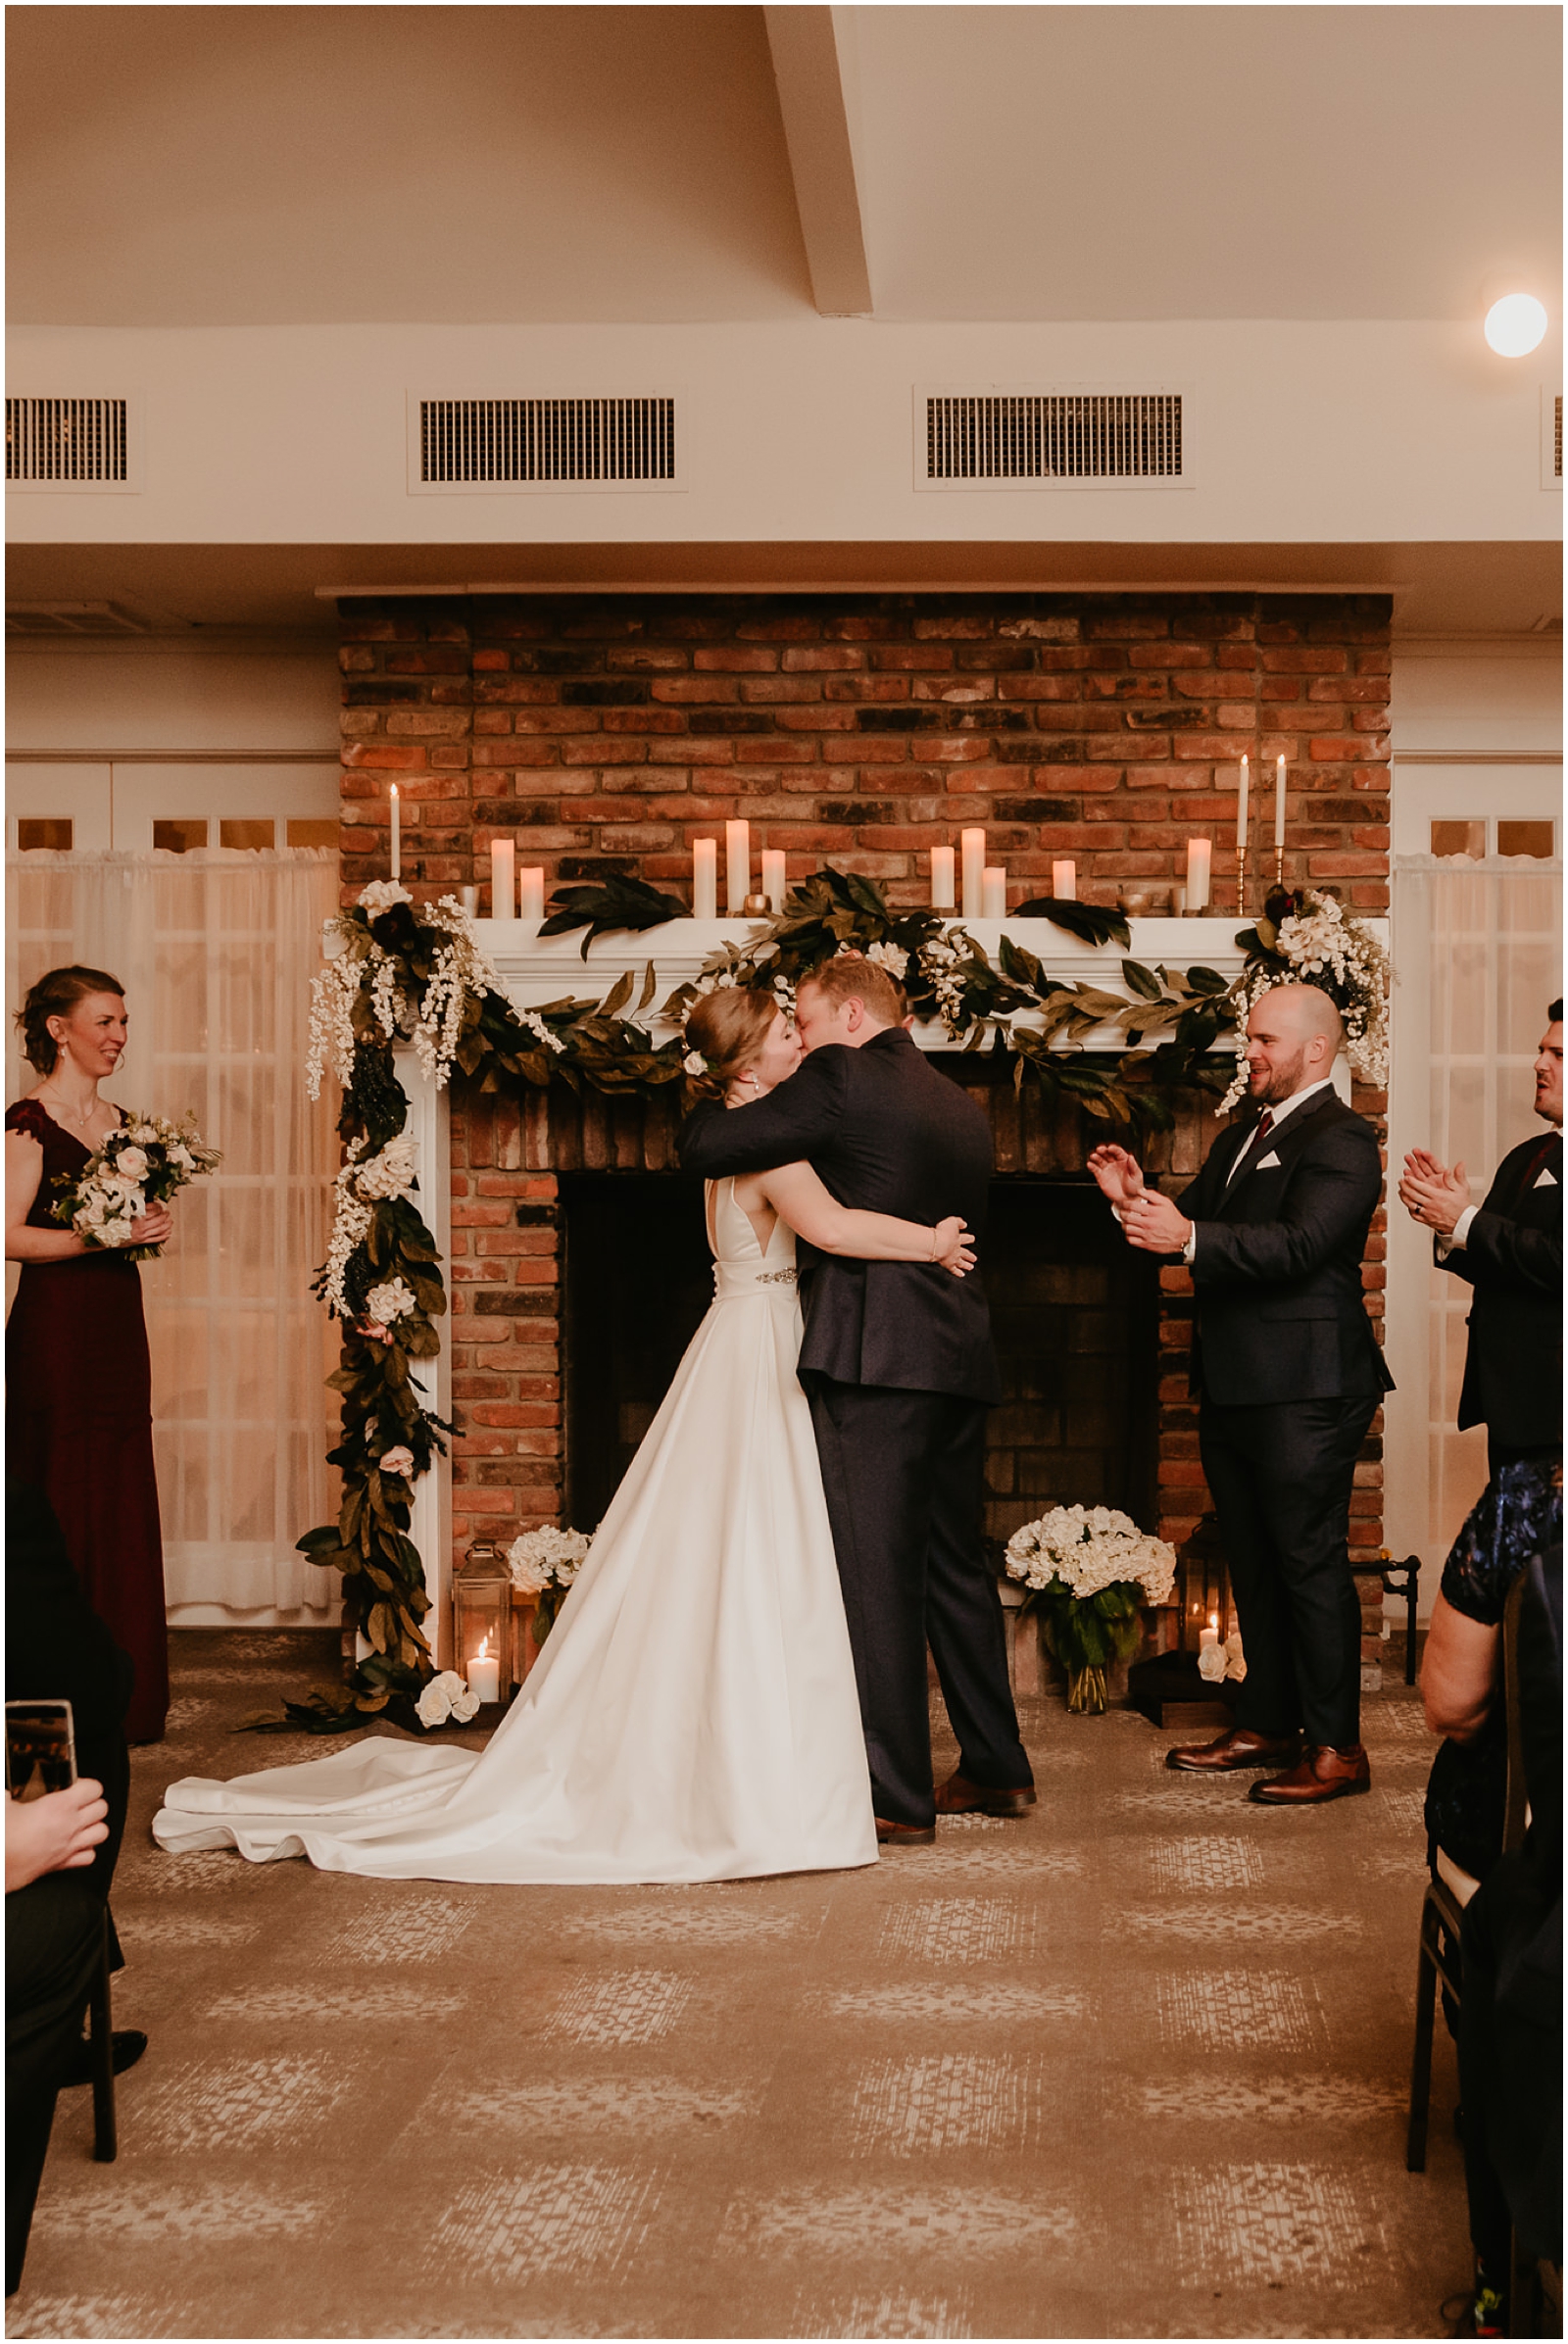 Indoor ceremony at The Tanglewood Club